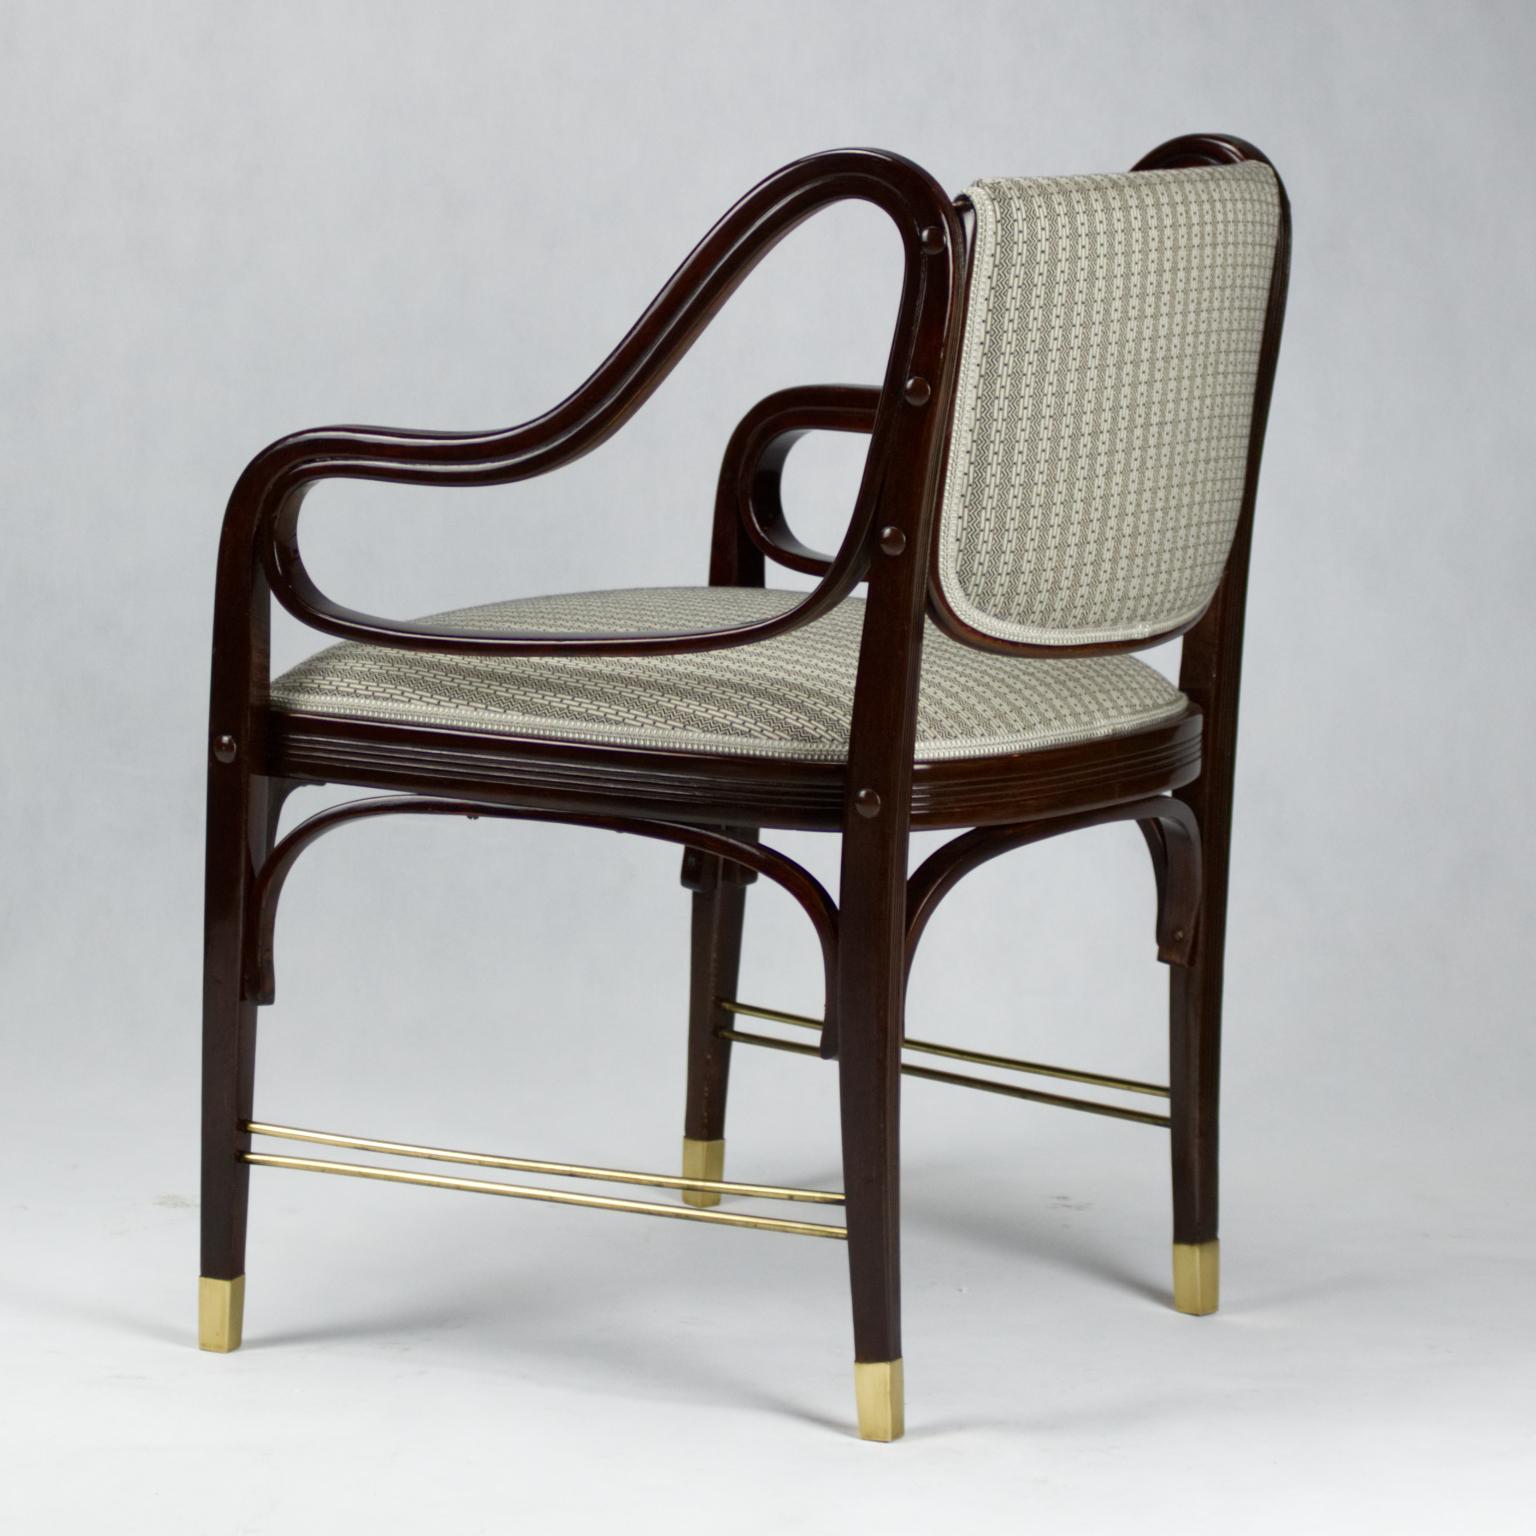 otto wagner chair